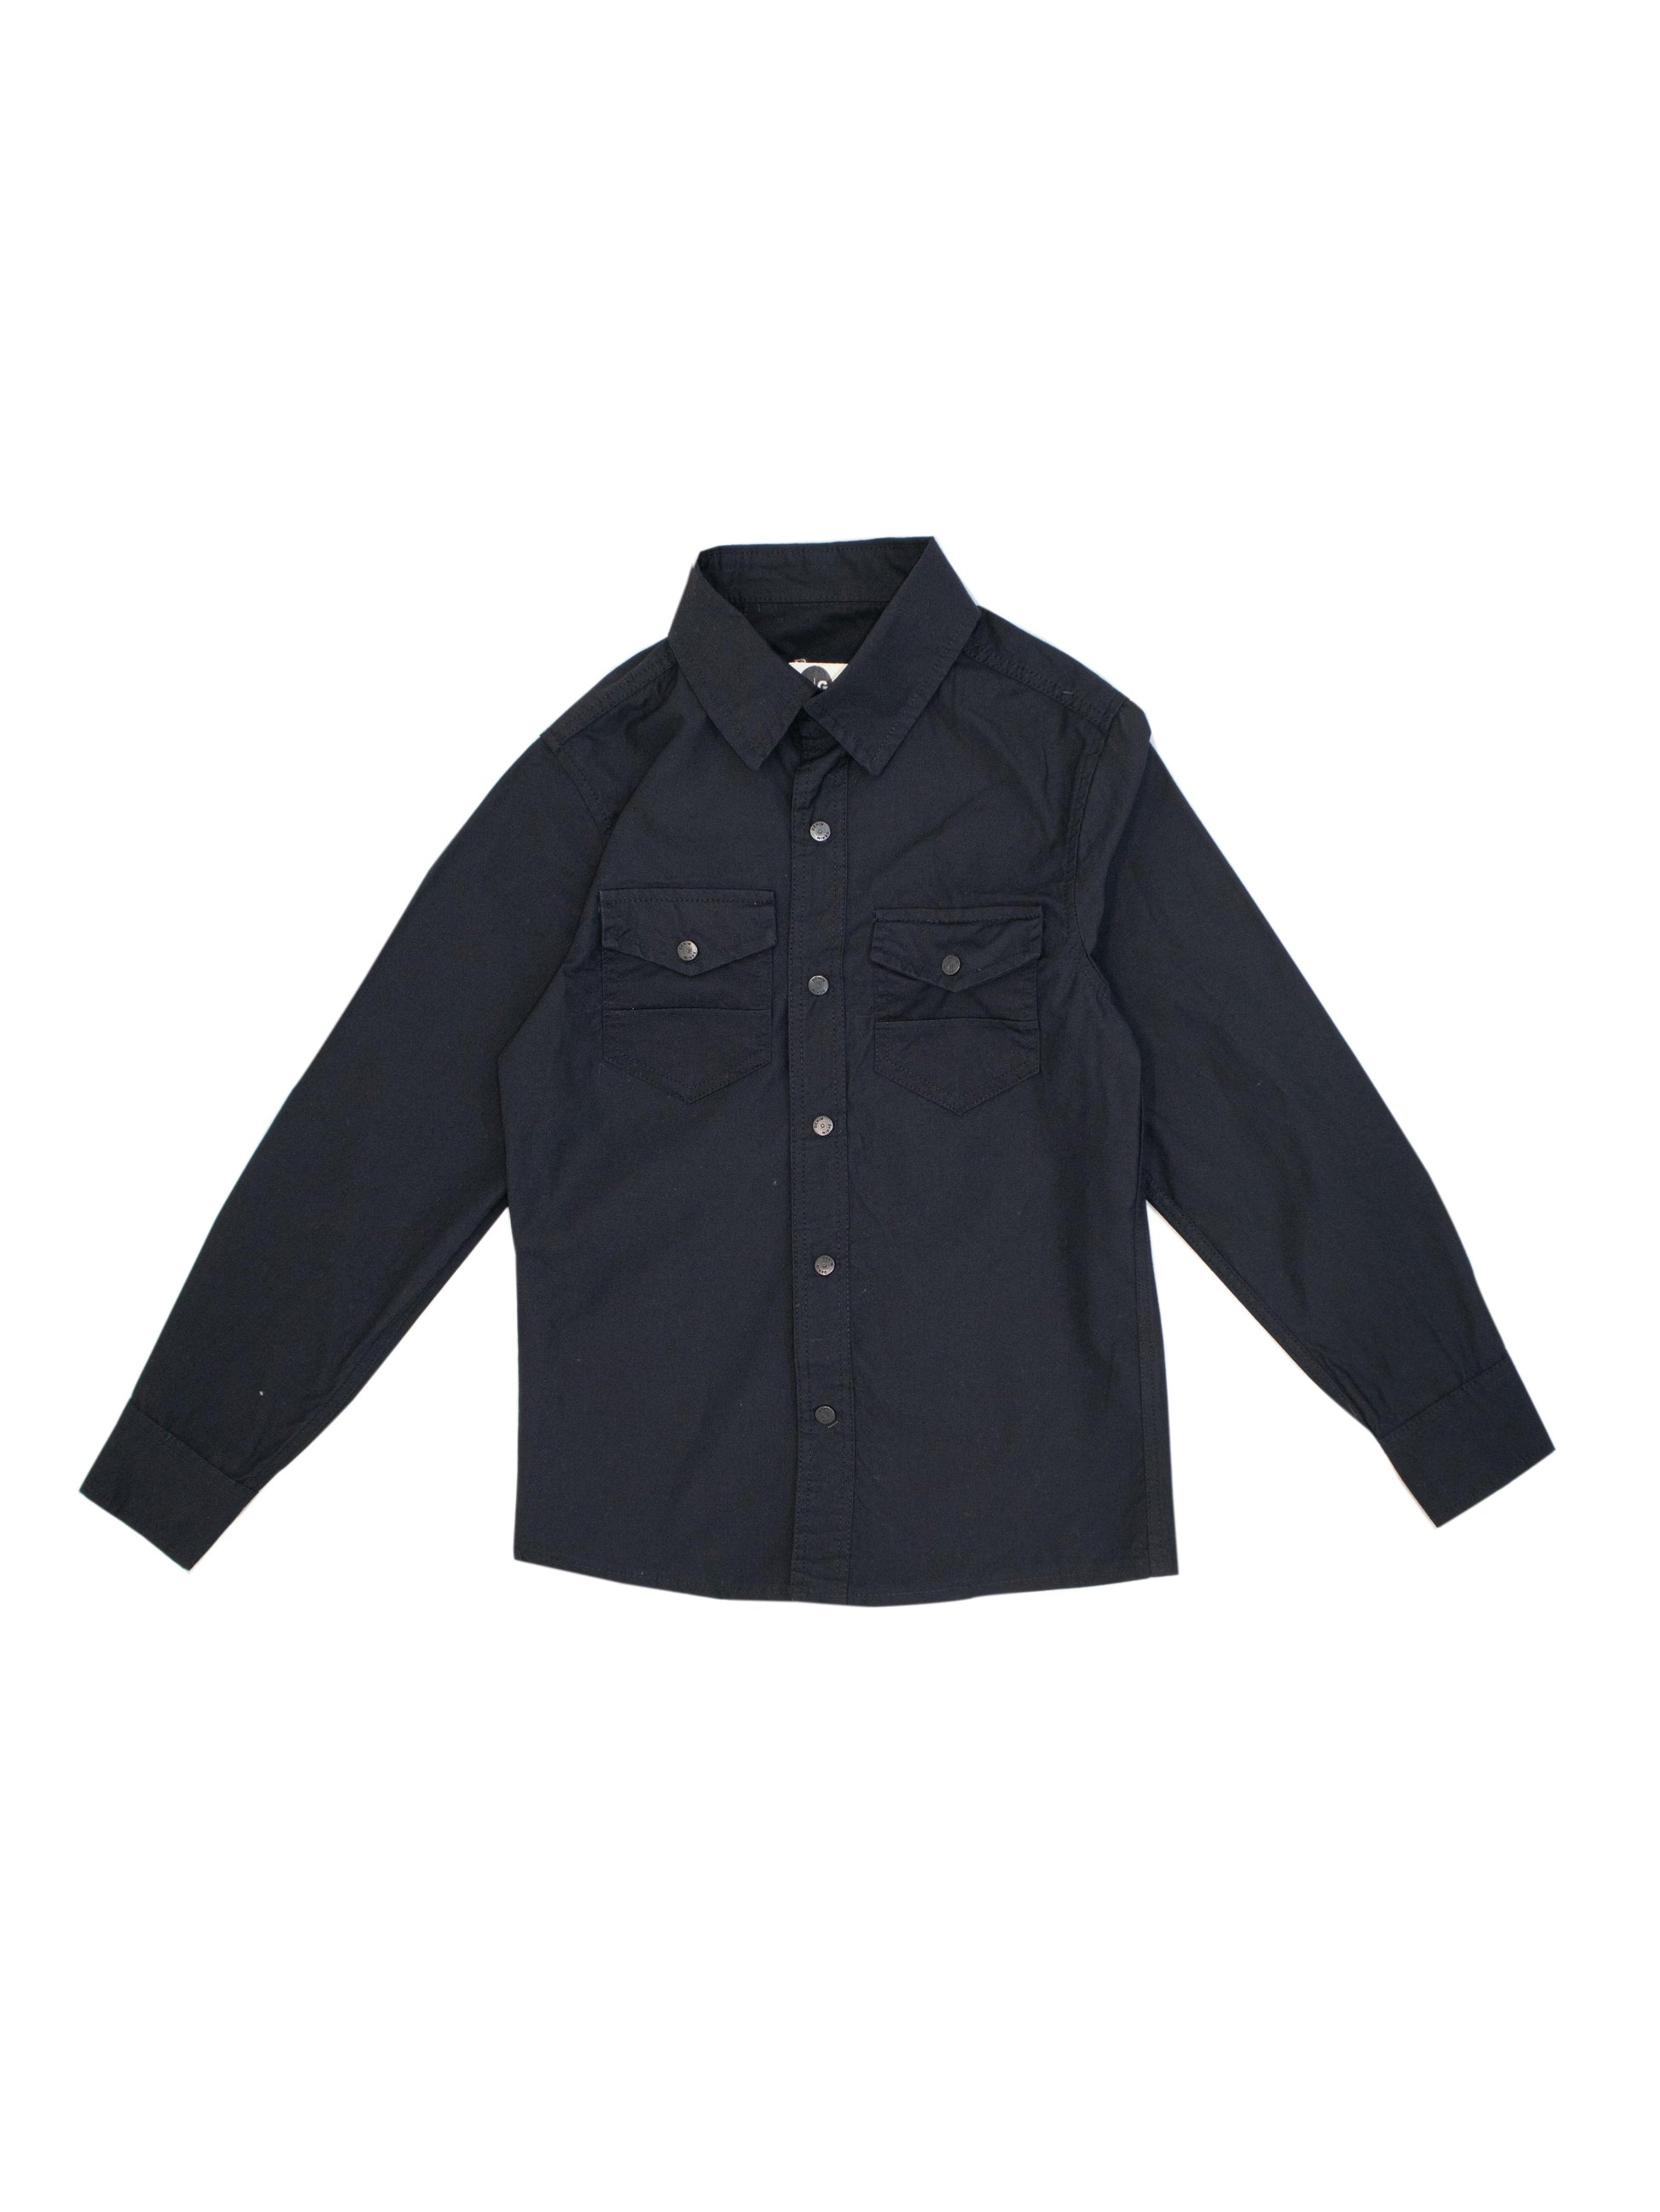 Teenage Long Sleeve Shirt With Buttons And Pockets In The Front